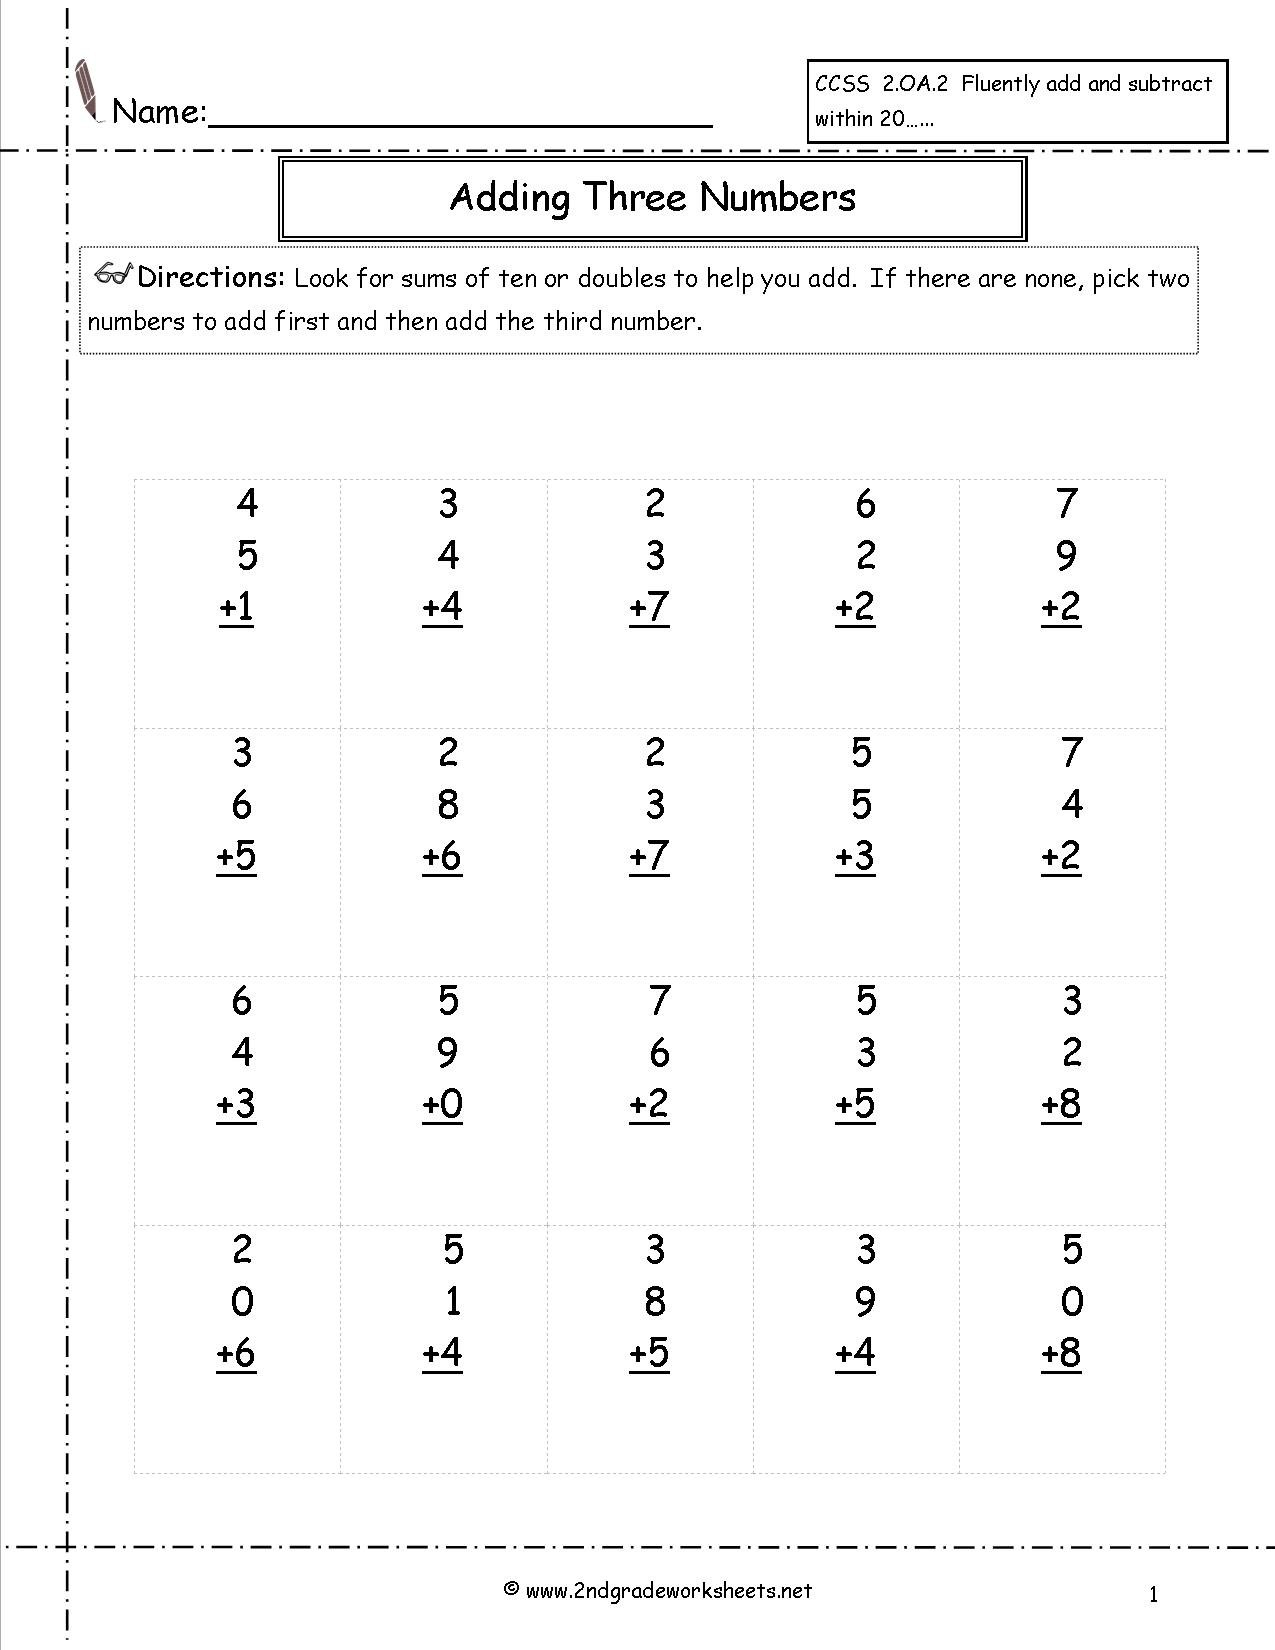 Adding Three Or More Single Digit Numbers Worksheets For Adding Three Numbers Worksheet